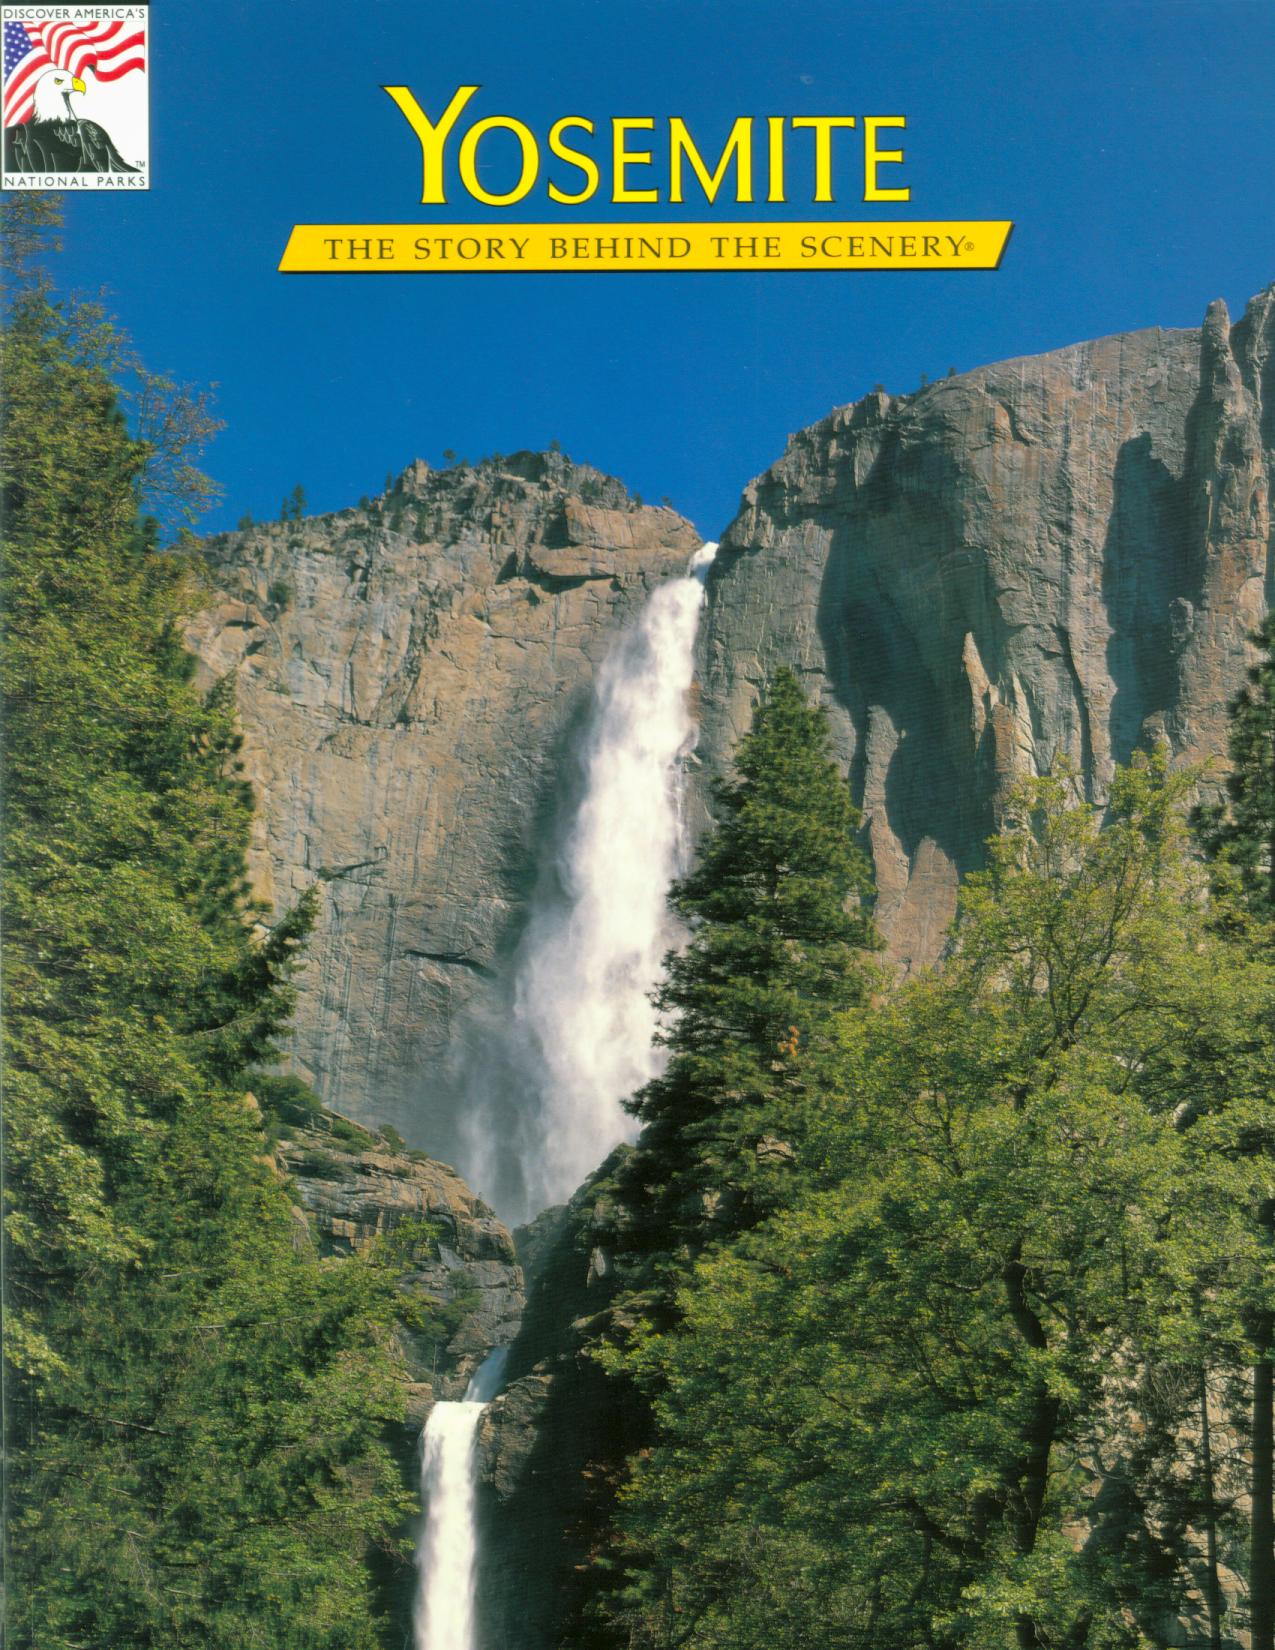 YOSEMITE: the story behind the scenery (CA).kcpu0738l